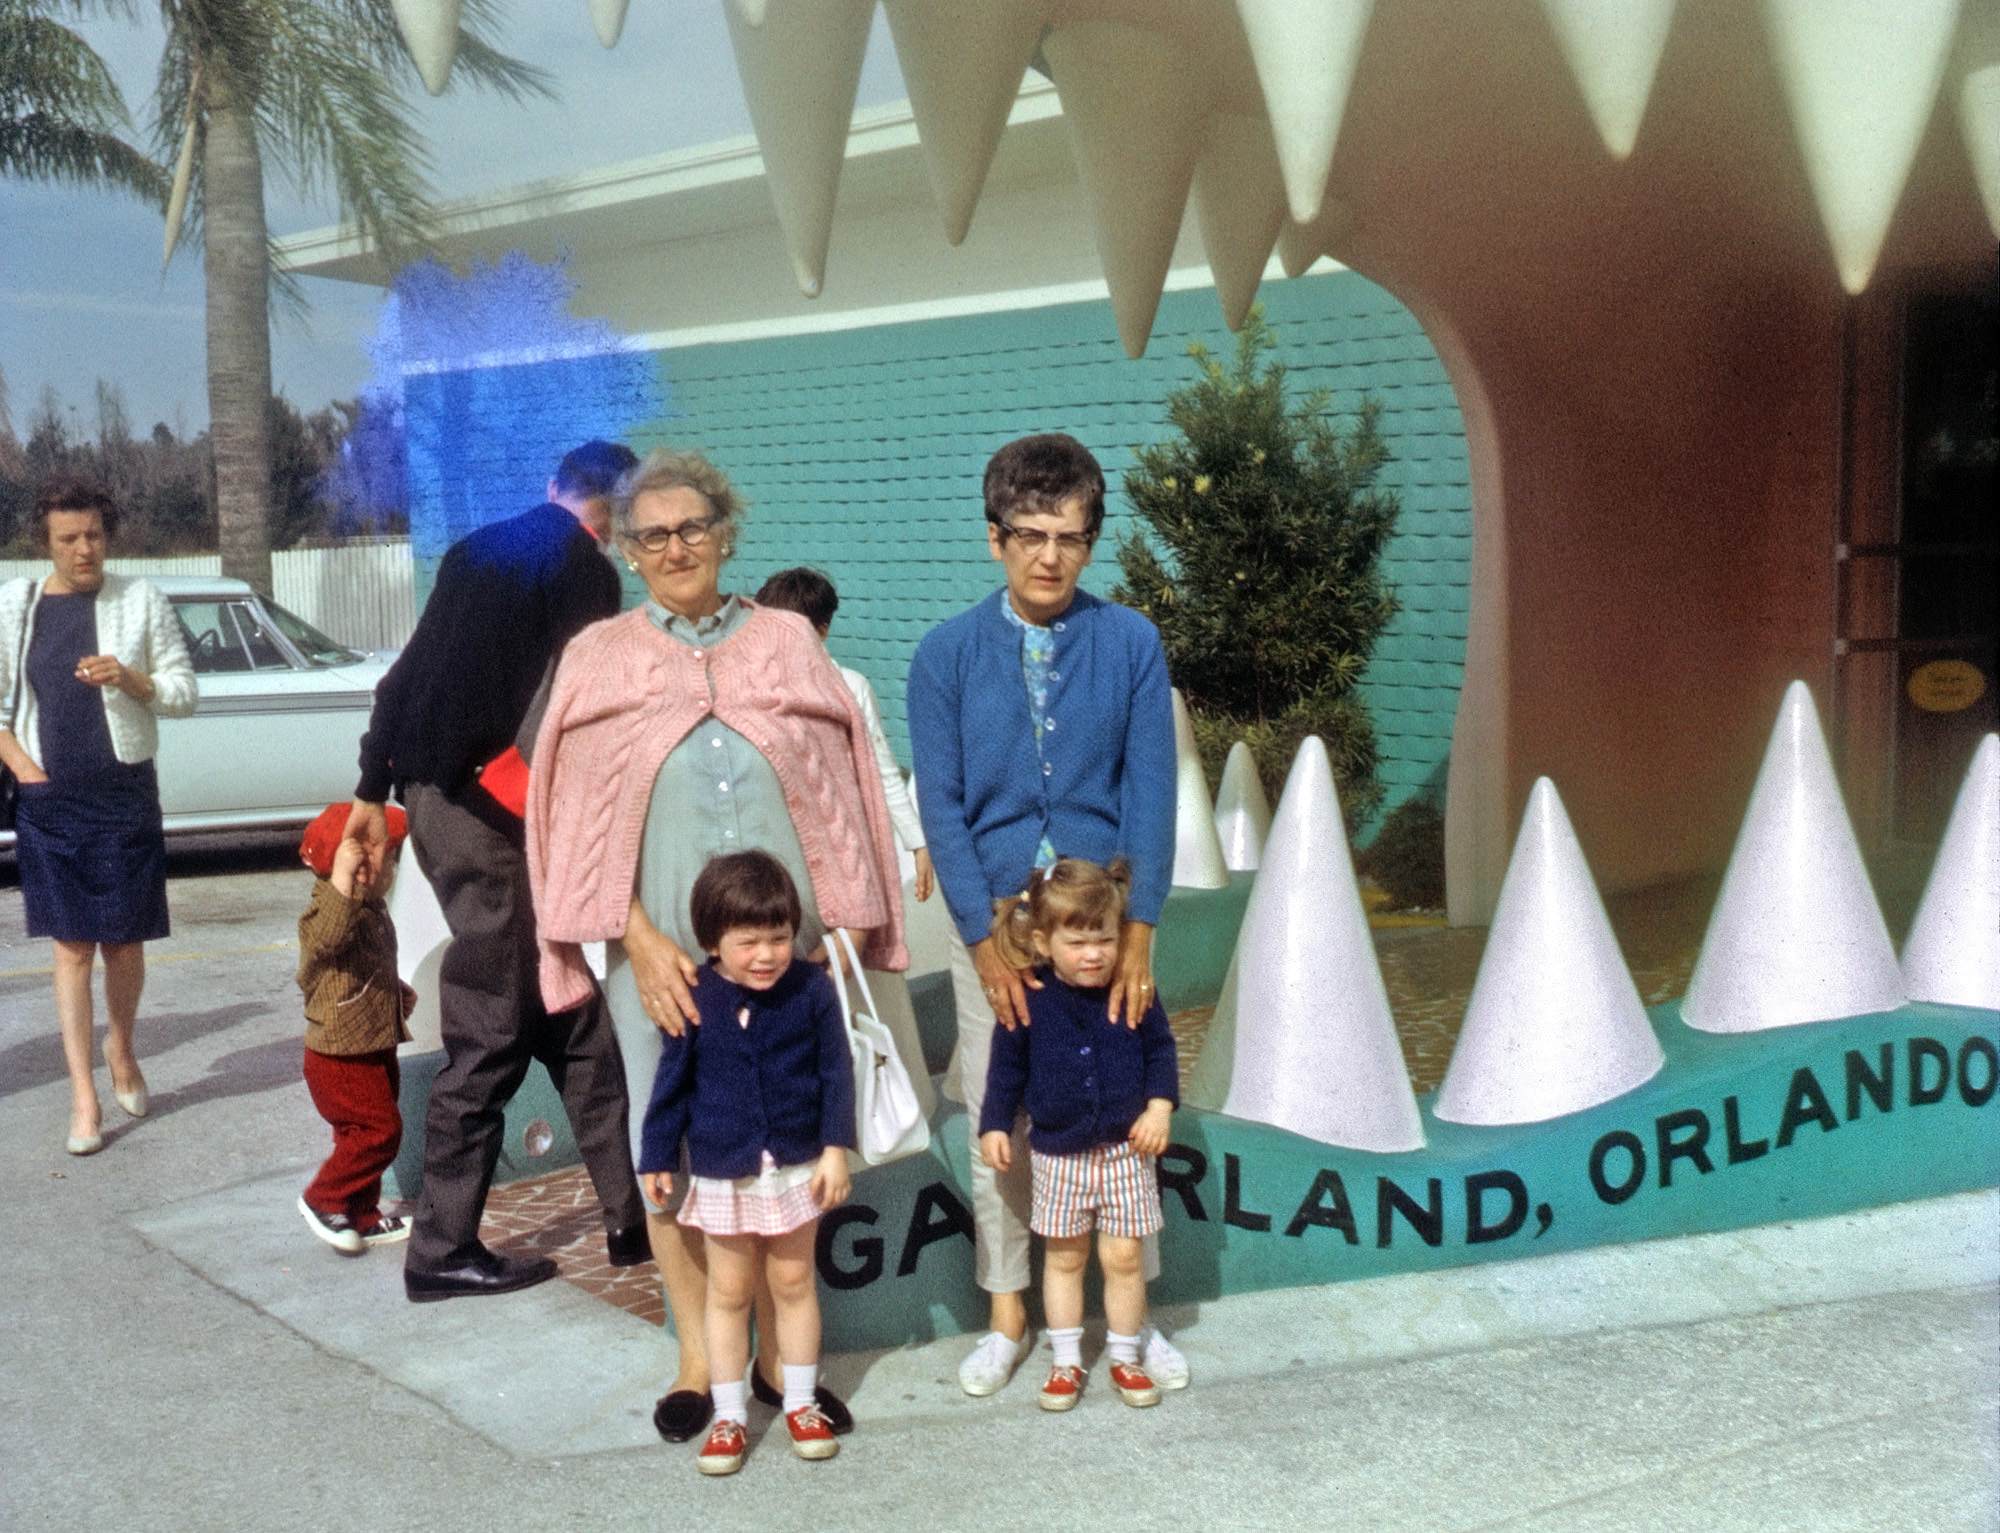 Another shot from the collection of family photos I've been scanning for a friend - she's the little girl on the right, with her sister, grandmother and aunt. Orlando, Florida's Gatorland still exists, as does this toothy entrance. The blue cloud is the result of mold eating its way down to the blue layer of the emulsion of this unbranded color slide, processed in February 1968. View full size.